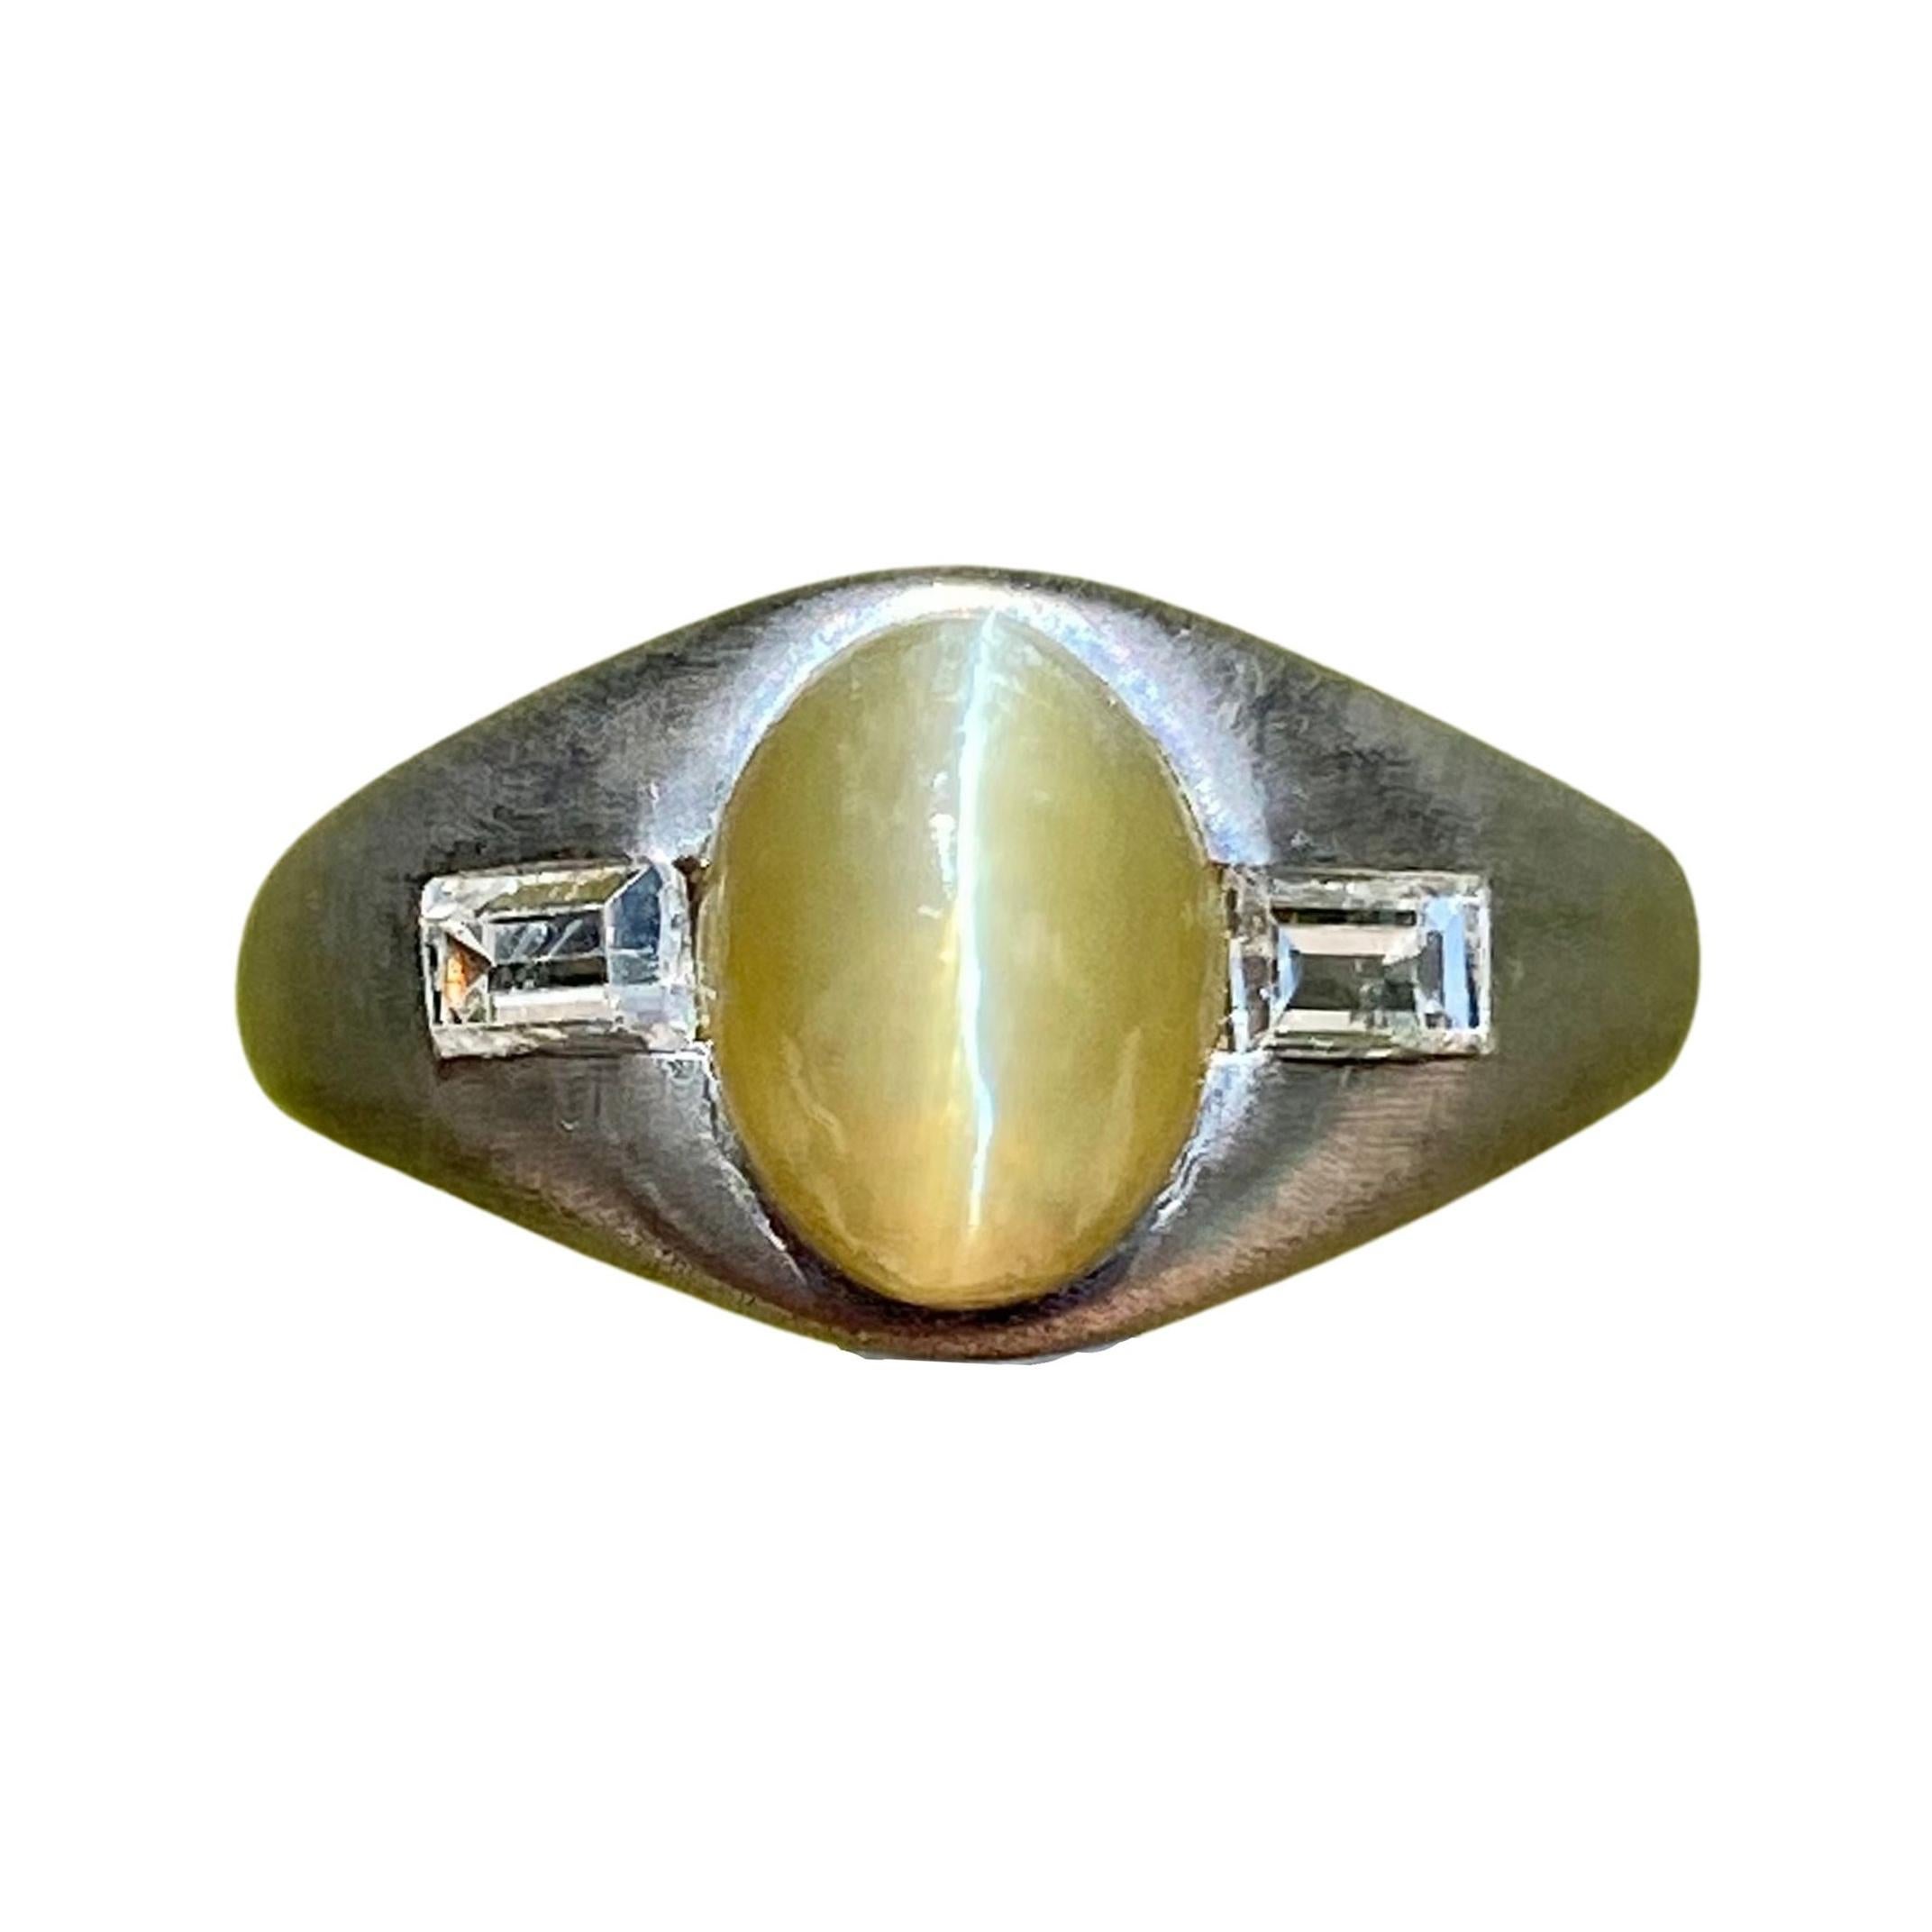 Buy Cats Eye Ring, Solid Sterling Silver Ring, Natural Cat's Eye Gemstone  Ring, Handmade Ring, Astro Stone Ring for Remove Rahu KETU Online in India  - Etsy | Cats eye ring, Sterling